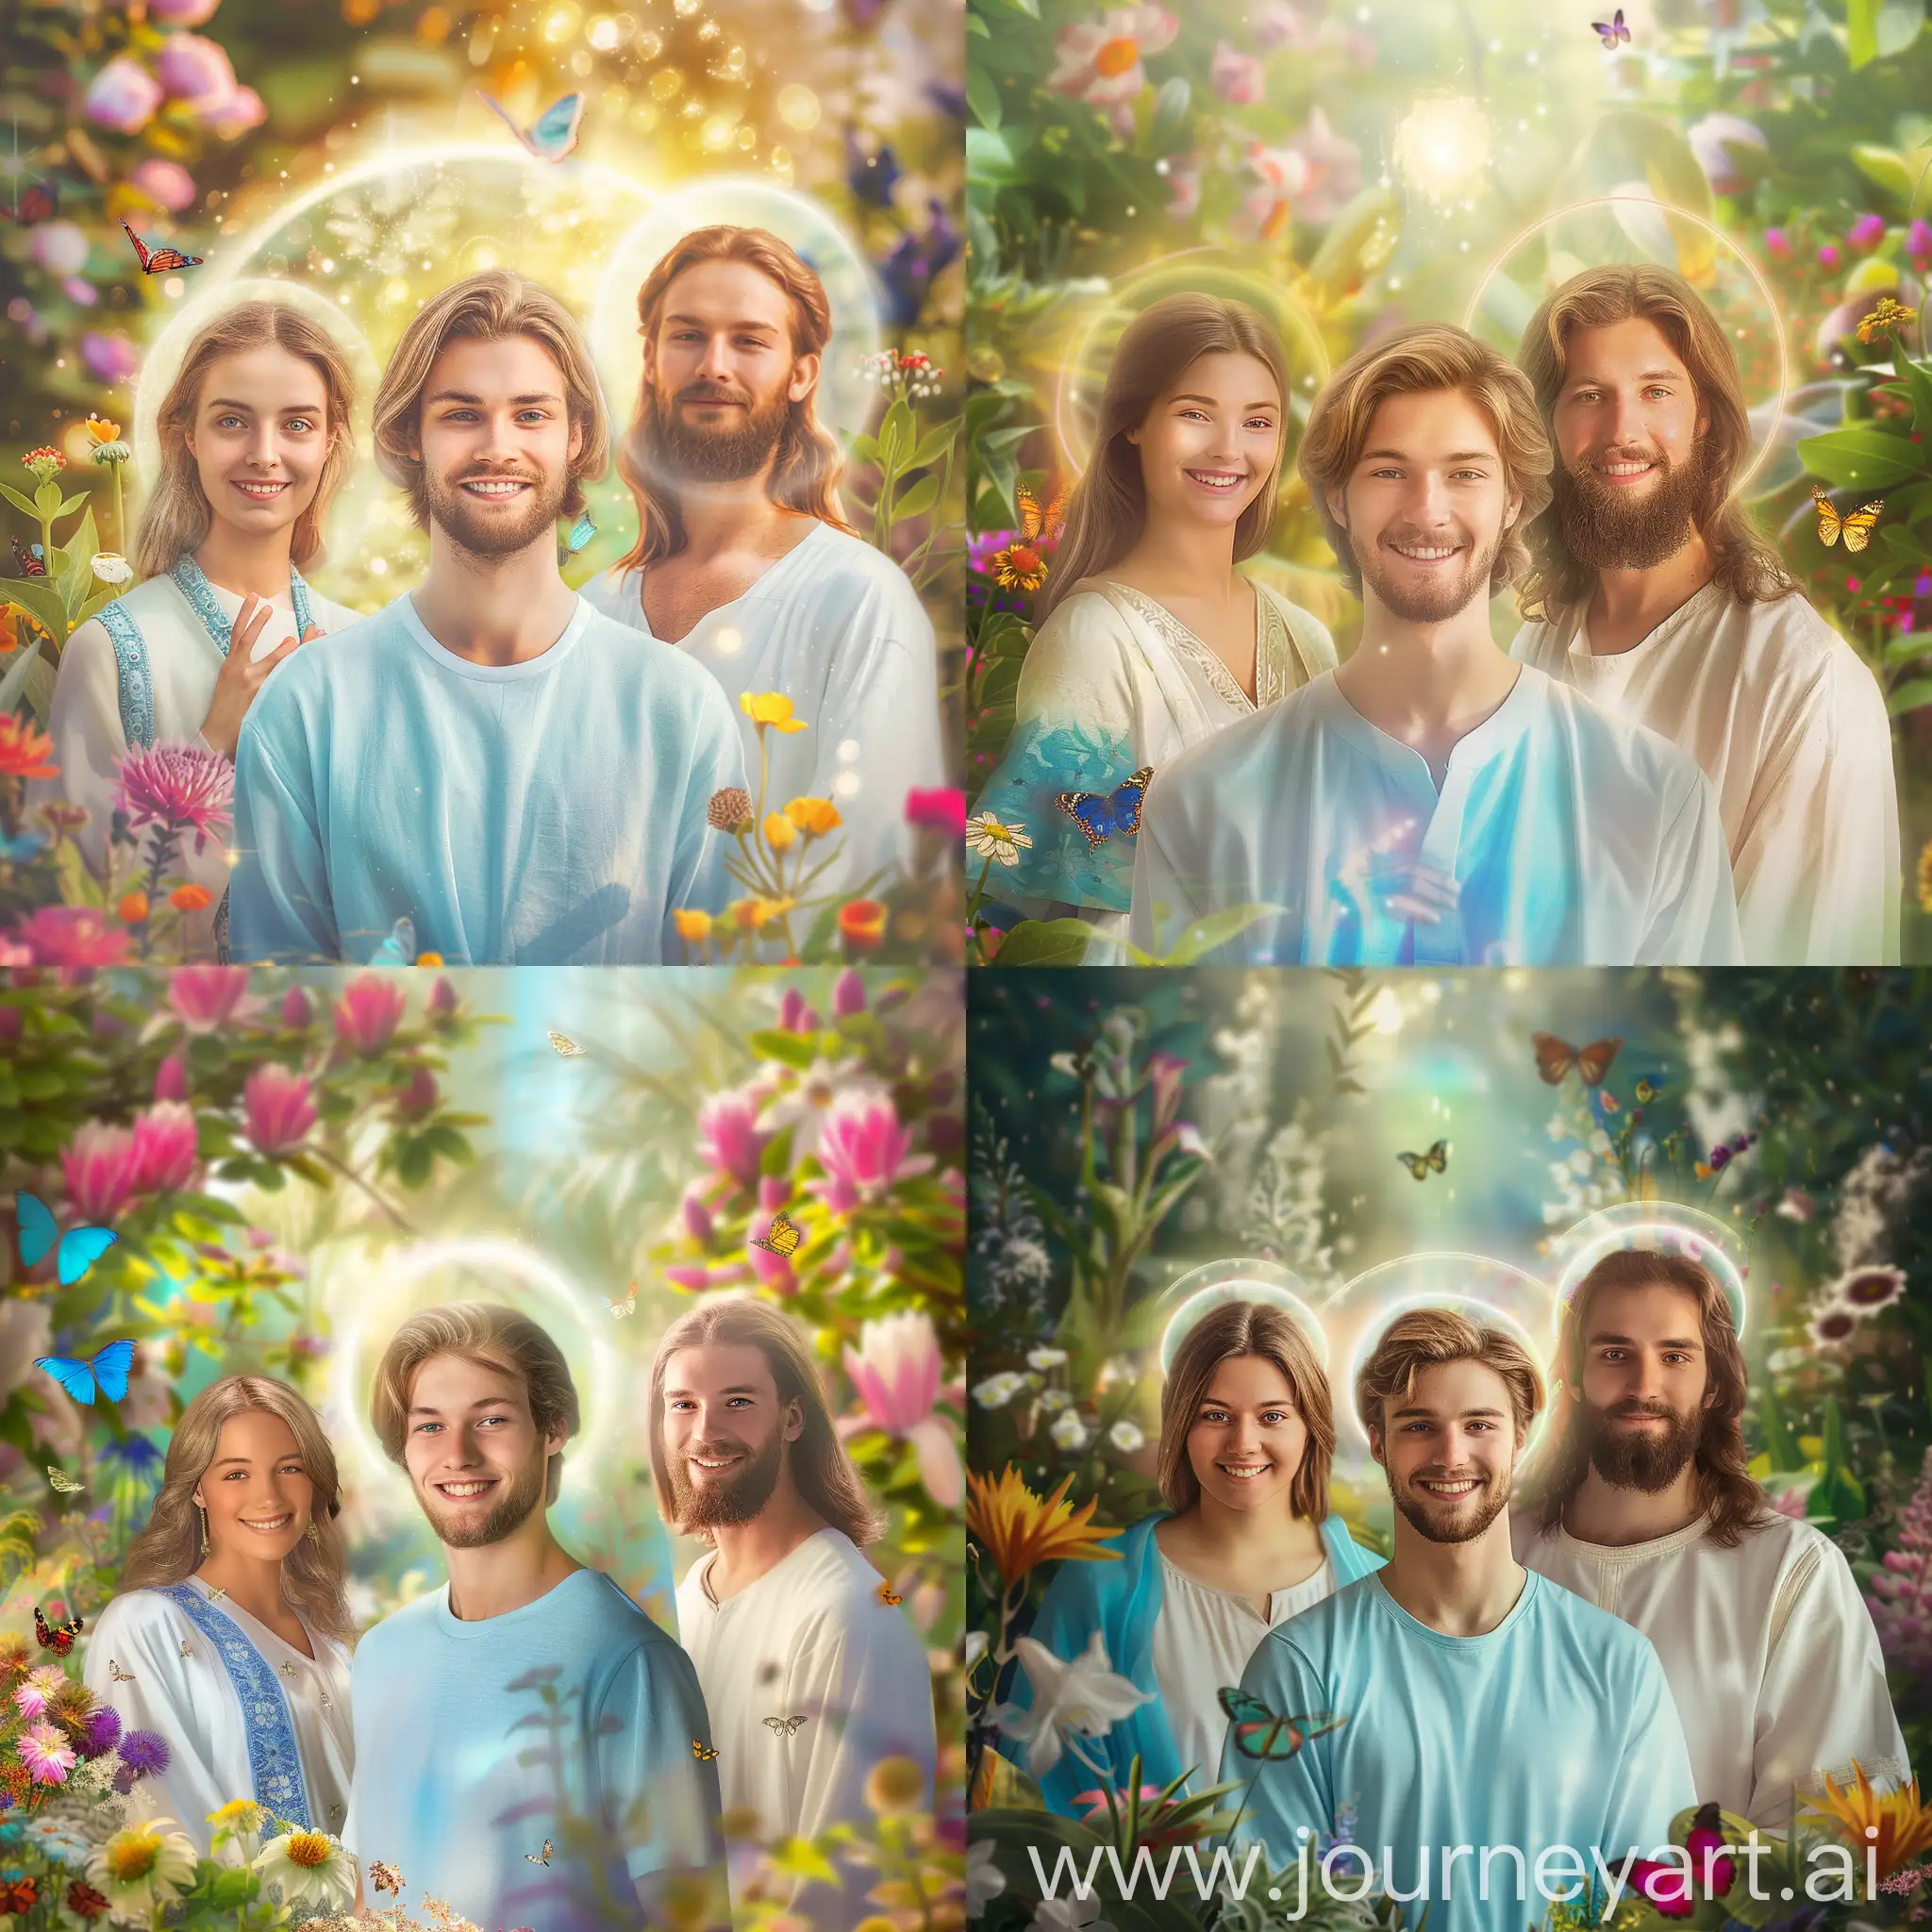 Create a digital image in the style of a serene, divine scene featuring three figures with a focus on harmony and peace. In the center, place a young man with light brown hair and a beard, smiling warmly, wearing a light blue shirt. To his left, include a woman with a gentle expression, wearing a white and blue robe, representing Mary. To his right, place a man with long hair and a beard, dressed in a white tunic, representing Jesus. Ensure all three figures are looking at the camera in a portrait-style pose. The background should be a lush, blooming garden with vibrant, colorful flowers and butterflies fluttering around. Add a soft, glowing halo around the heads of Mary and Jesus to highlight their sacred nature. The overall atmosphere should be peaceful, radiant, and ethereal, with soft lighting that enhances the spiritual and harmonious feel of the scene.